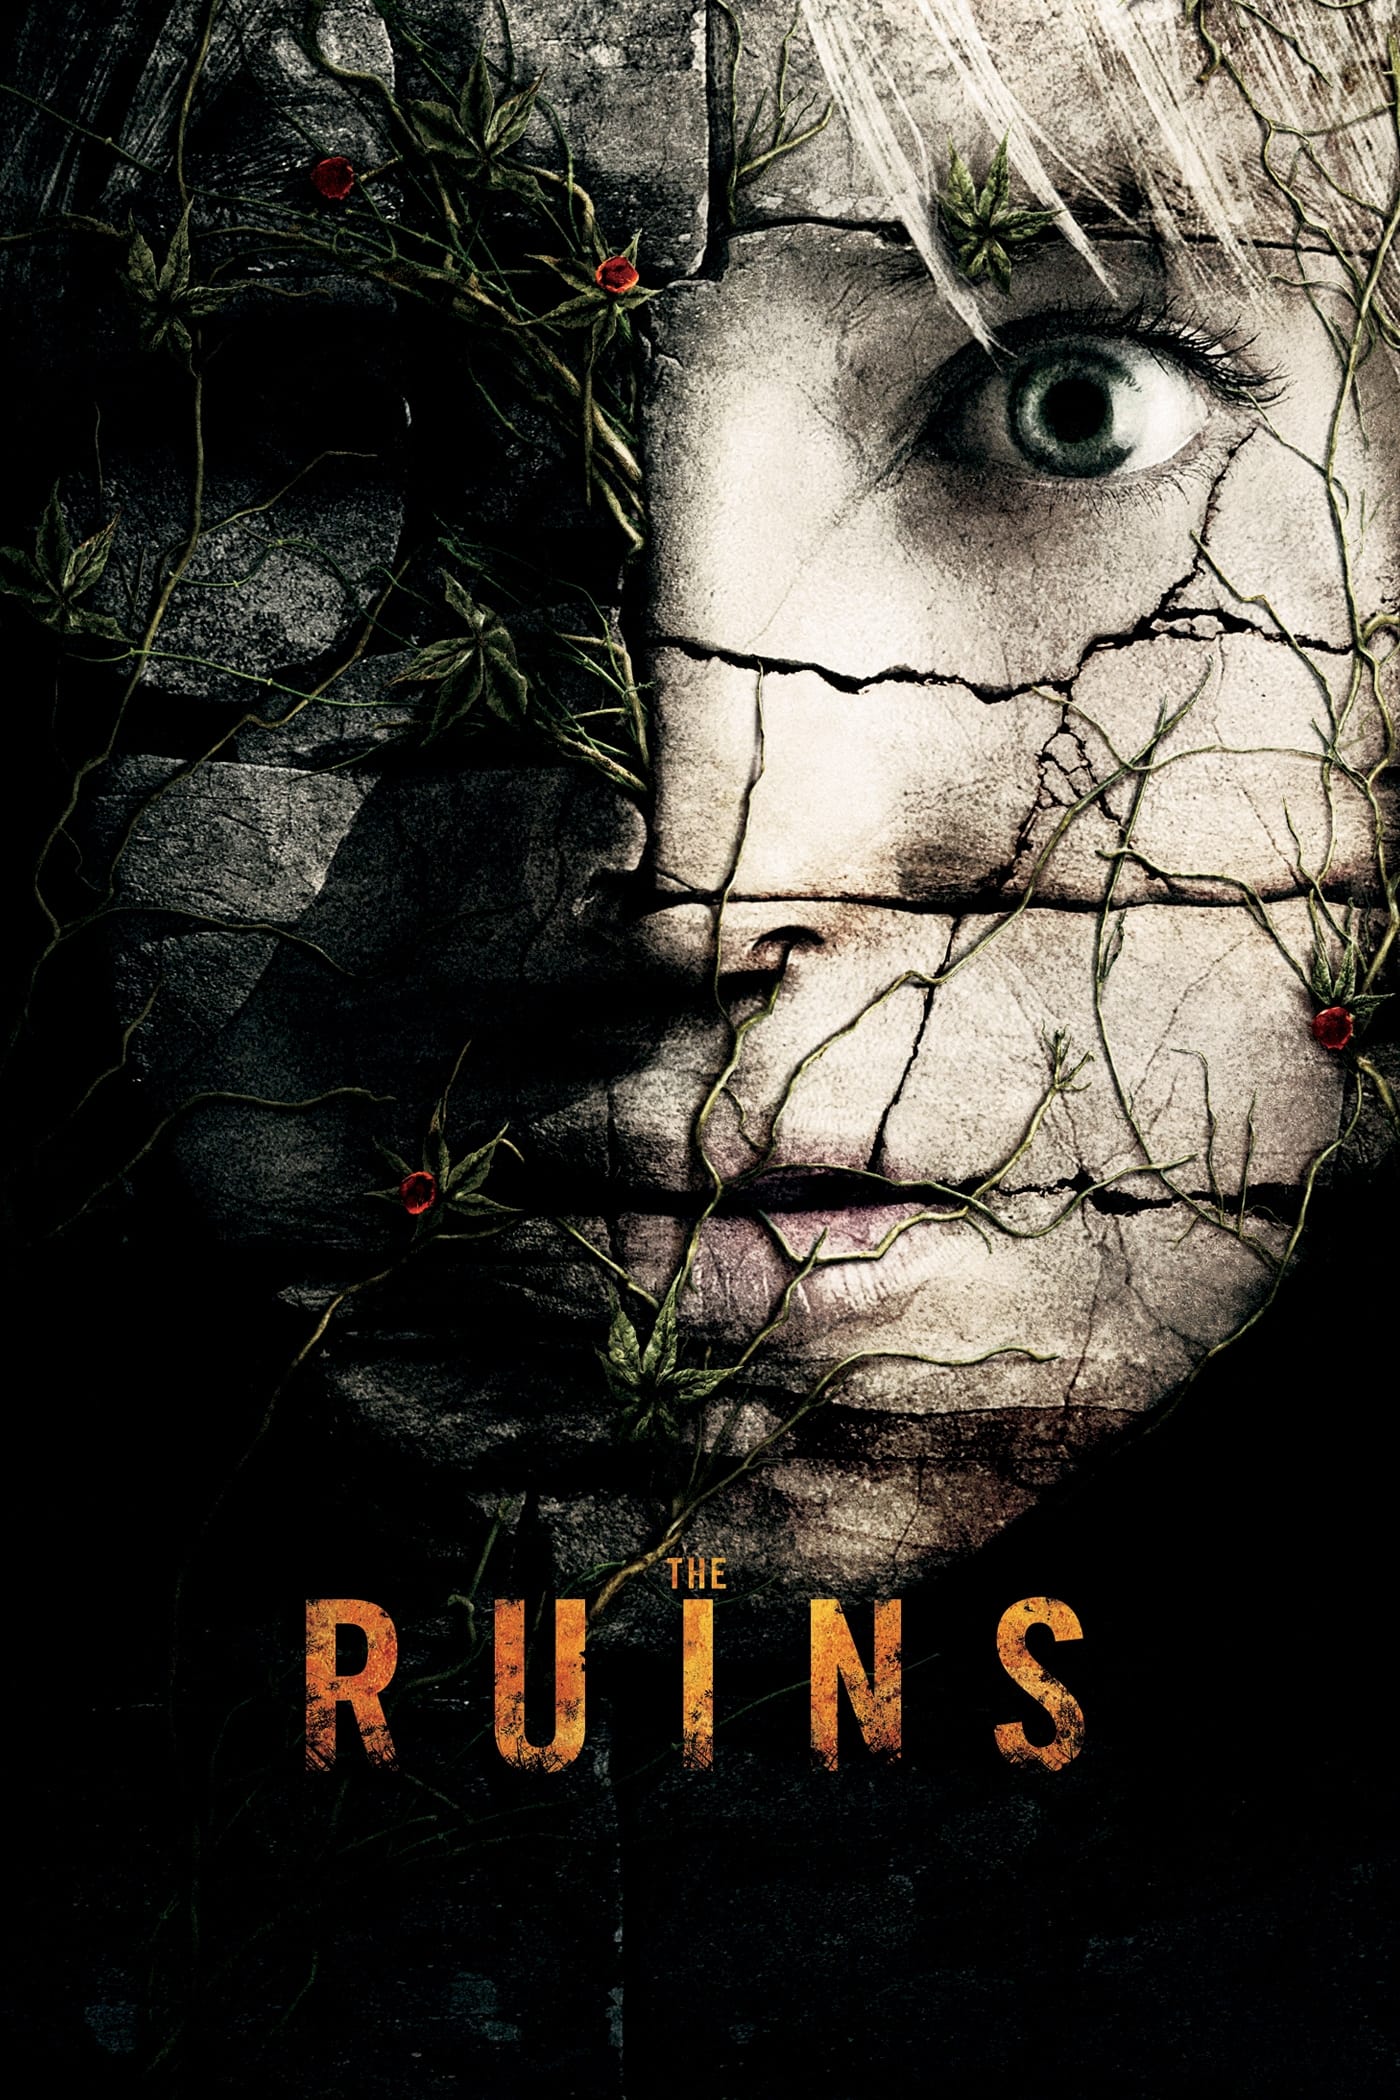 The Ruins (2008)